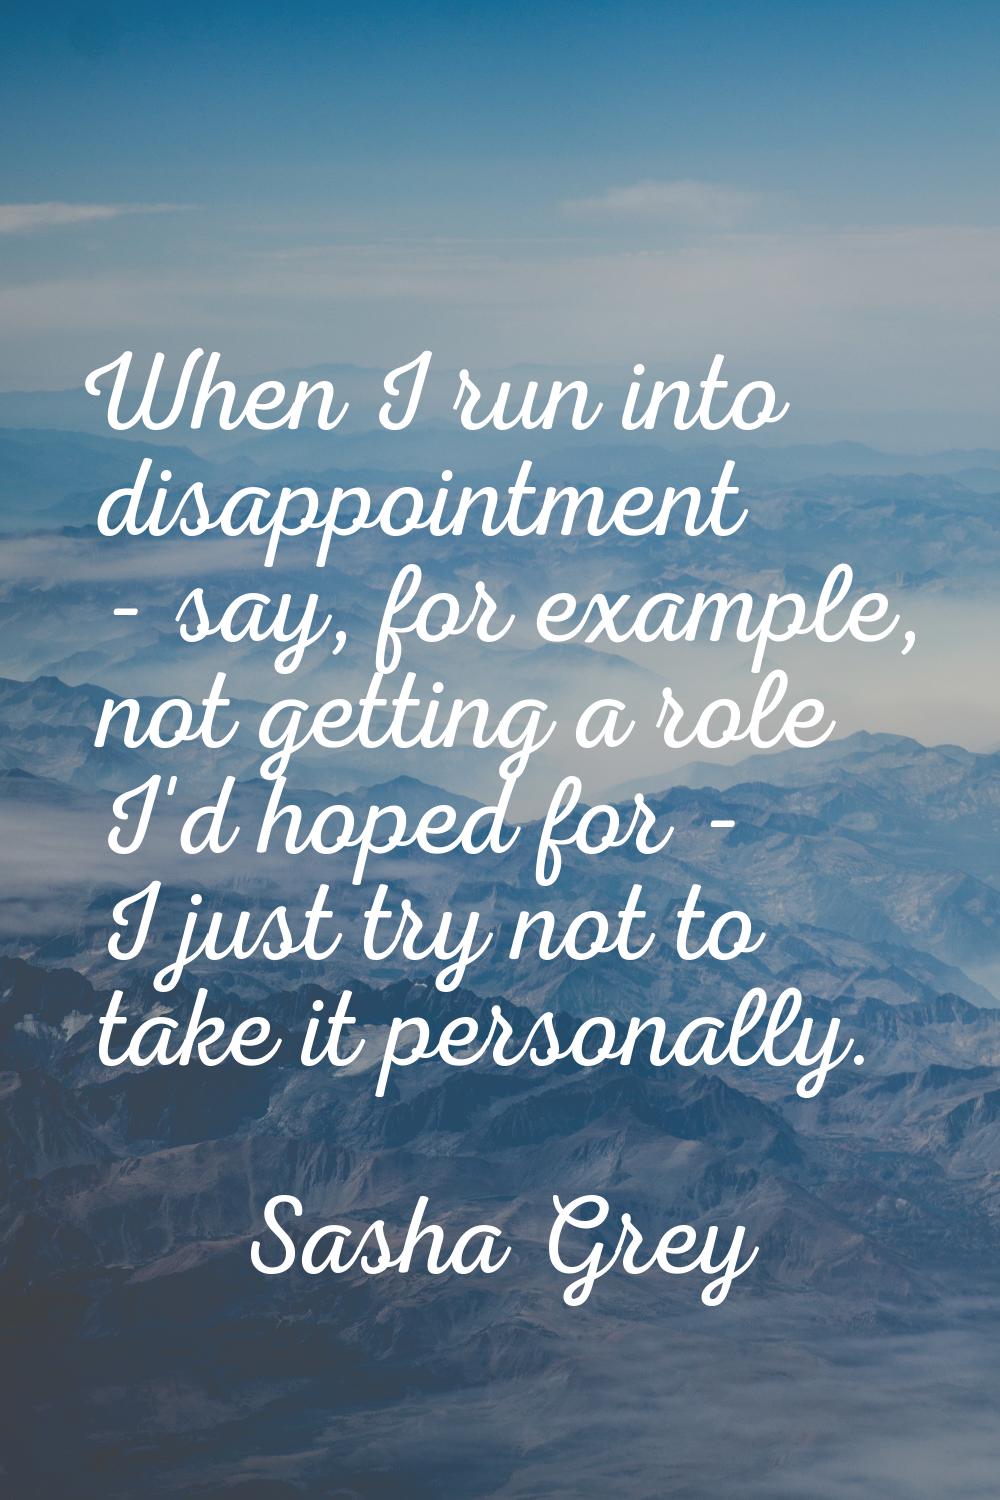 When I run into disappointment - say, for example, not getting a role I'd hoped for - I just try no